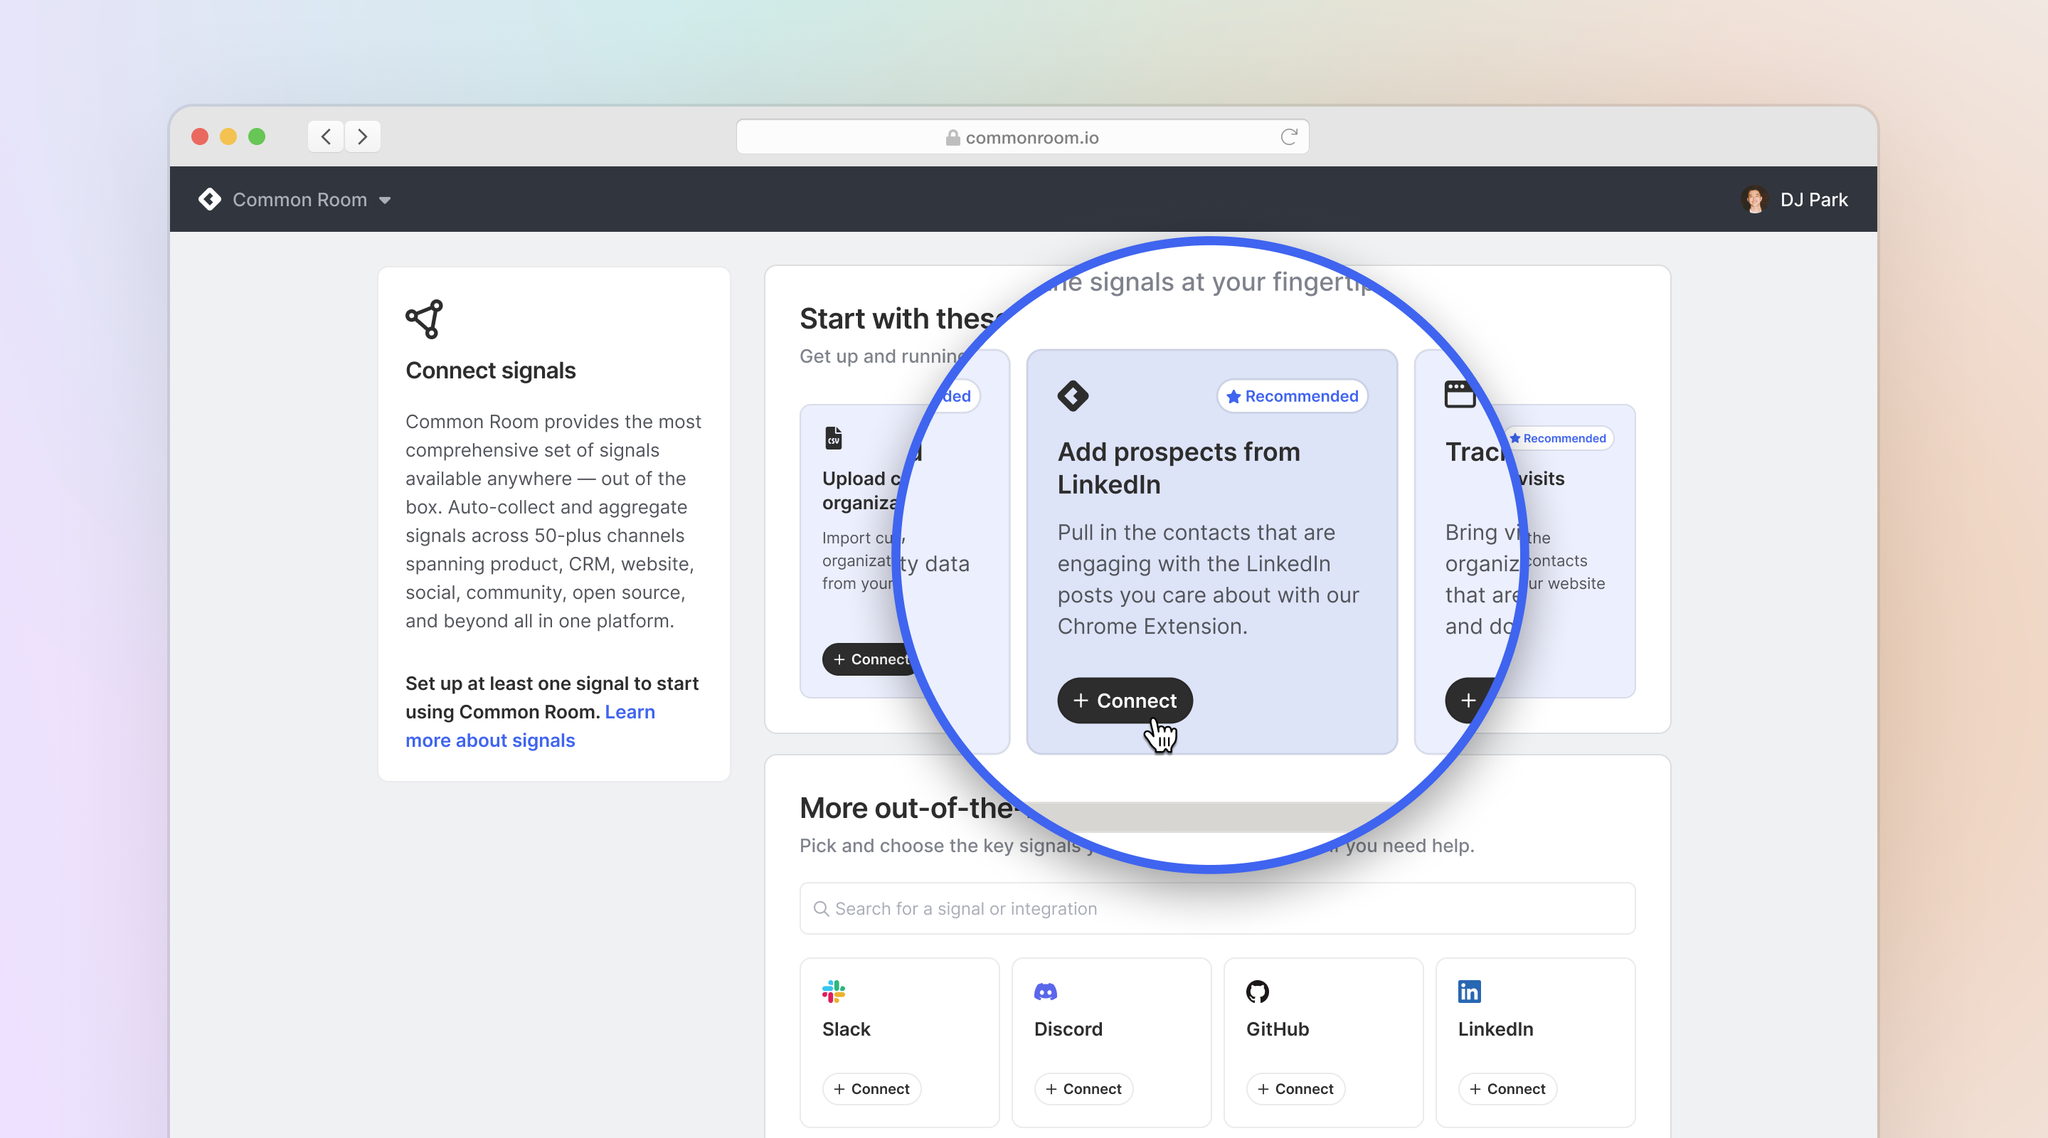 Image of Chrome extension sign-up flow